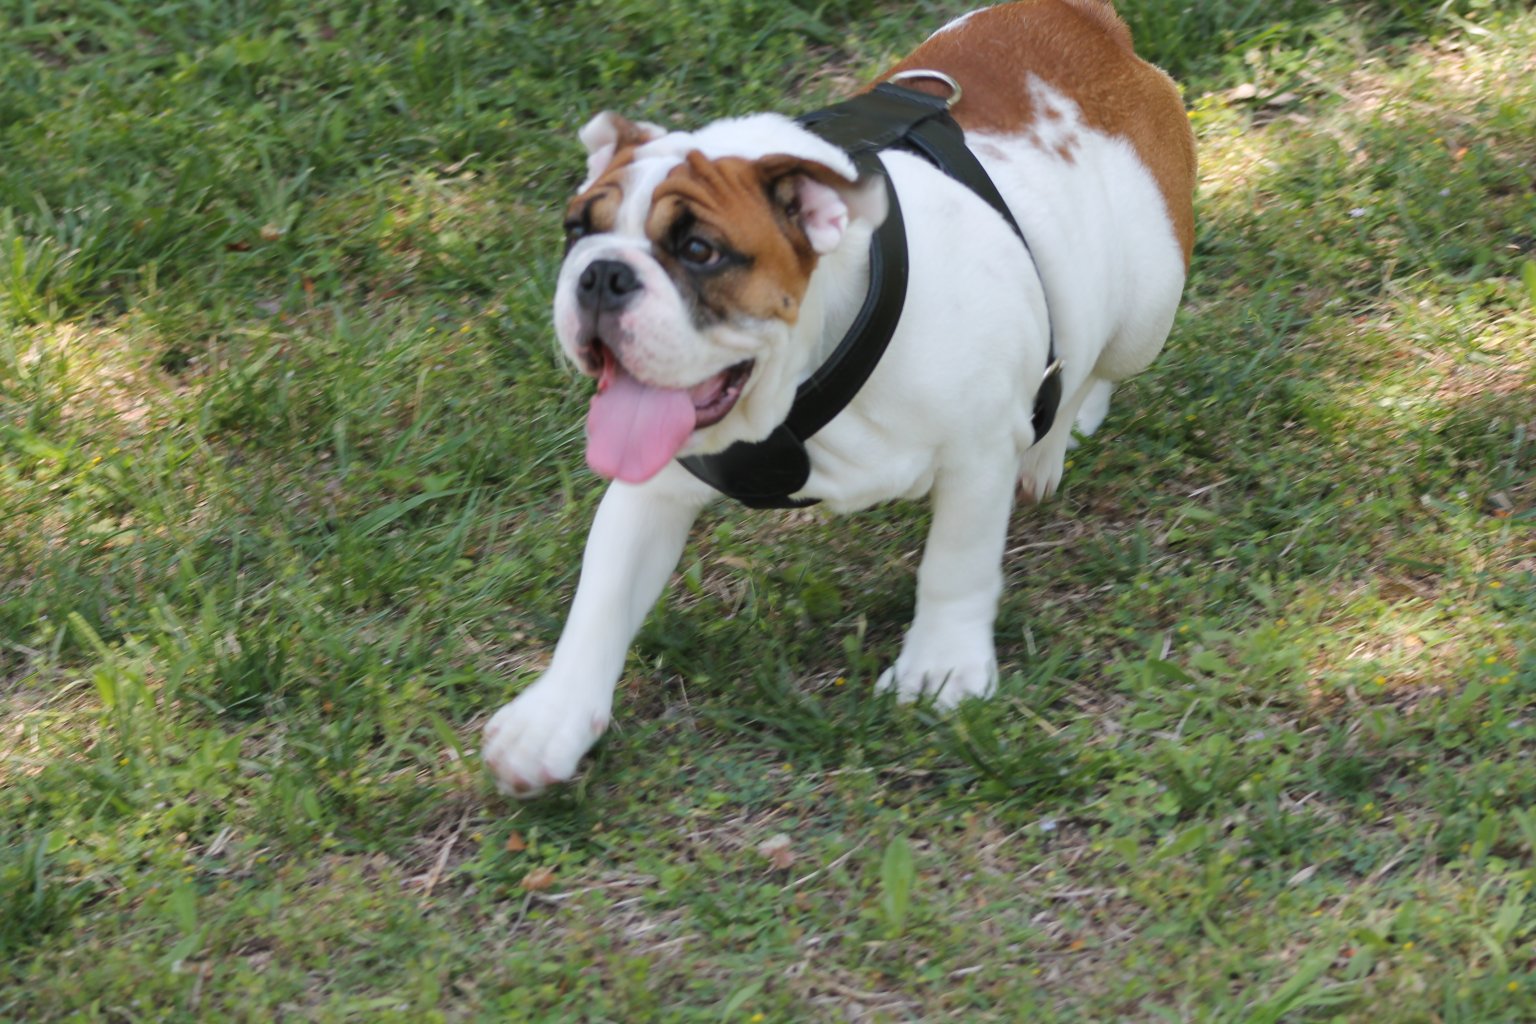 The Bulldog Harness is Extremely Important. Find out Why